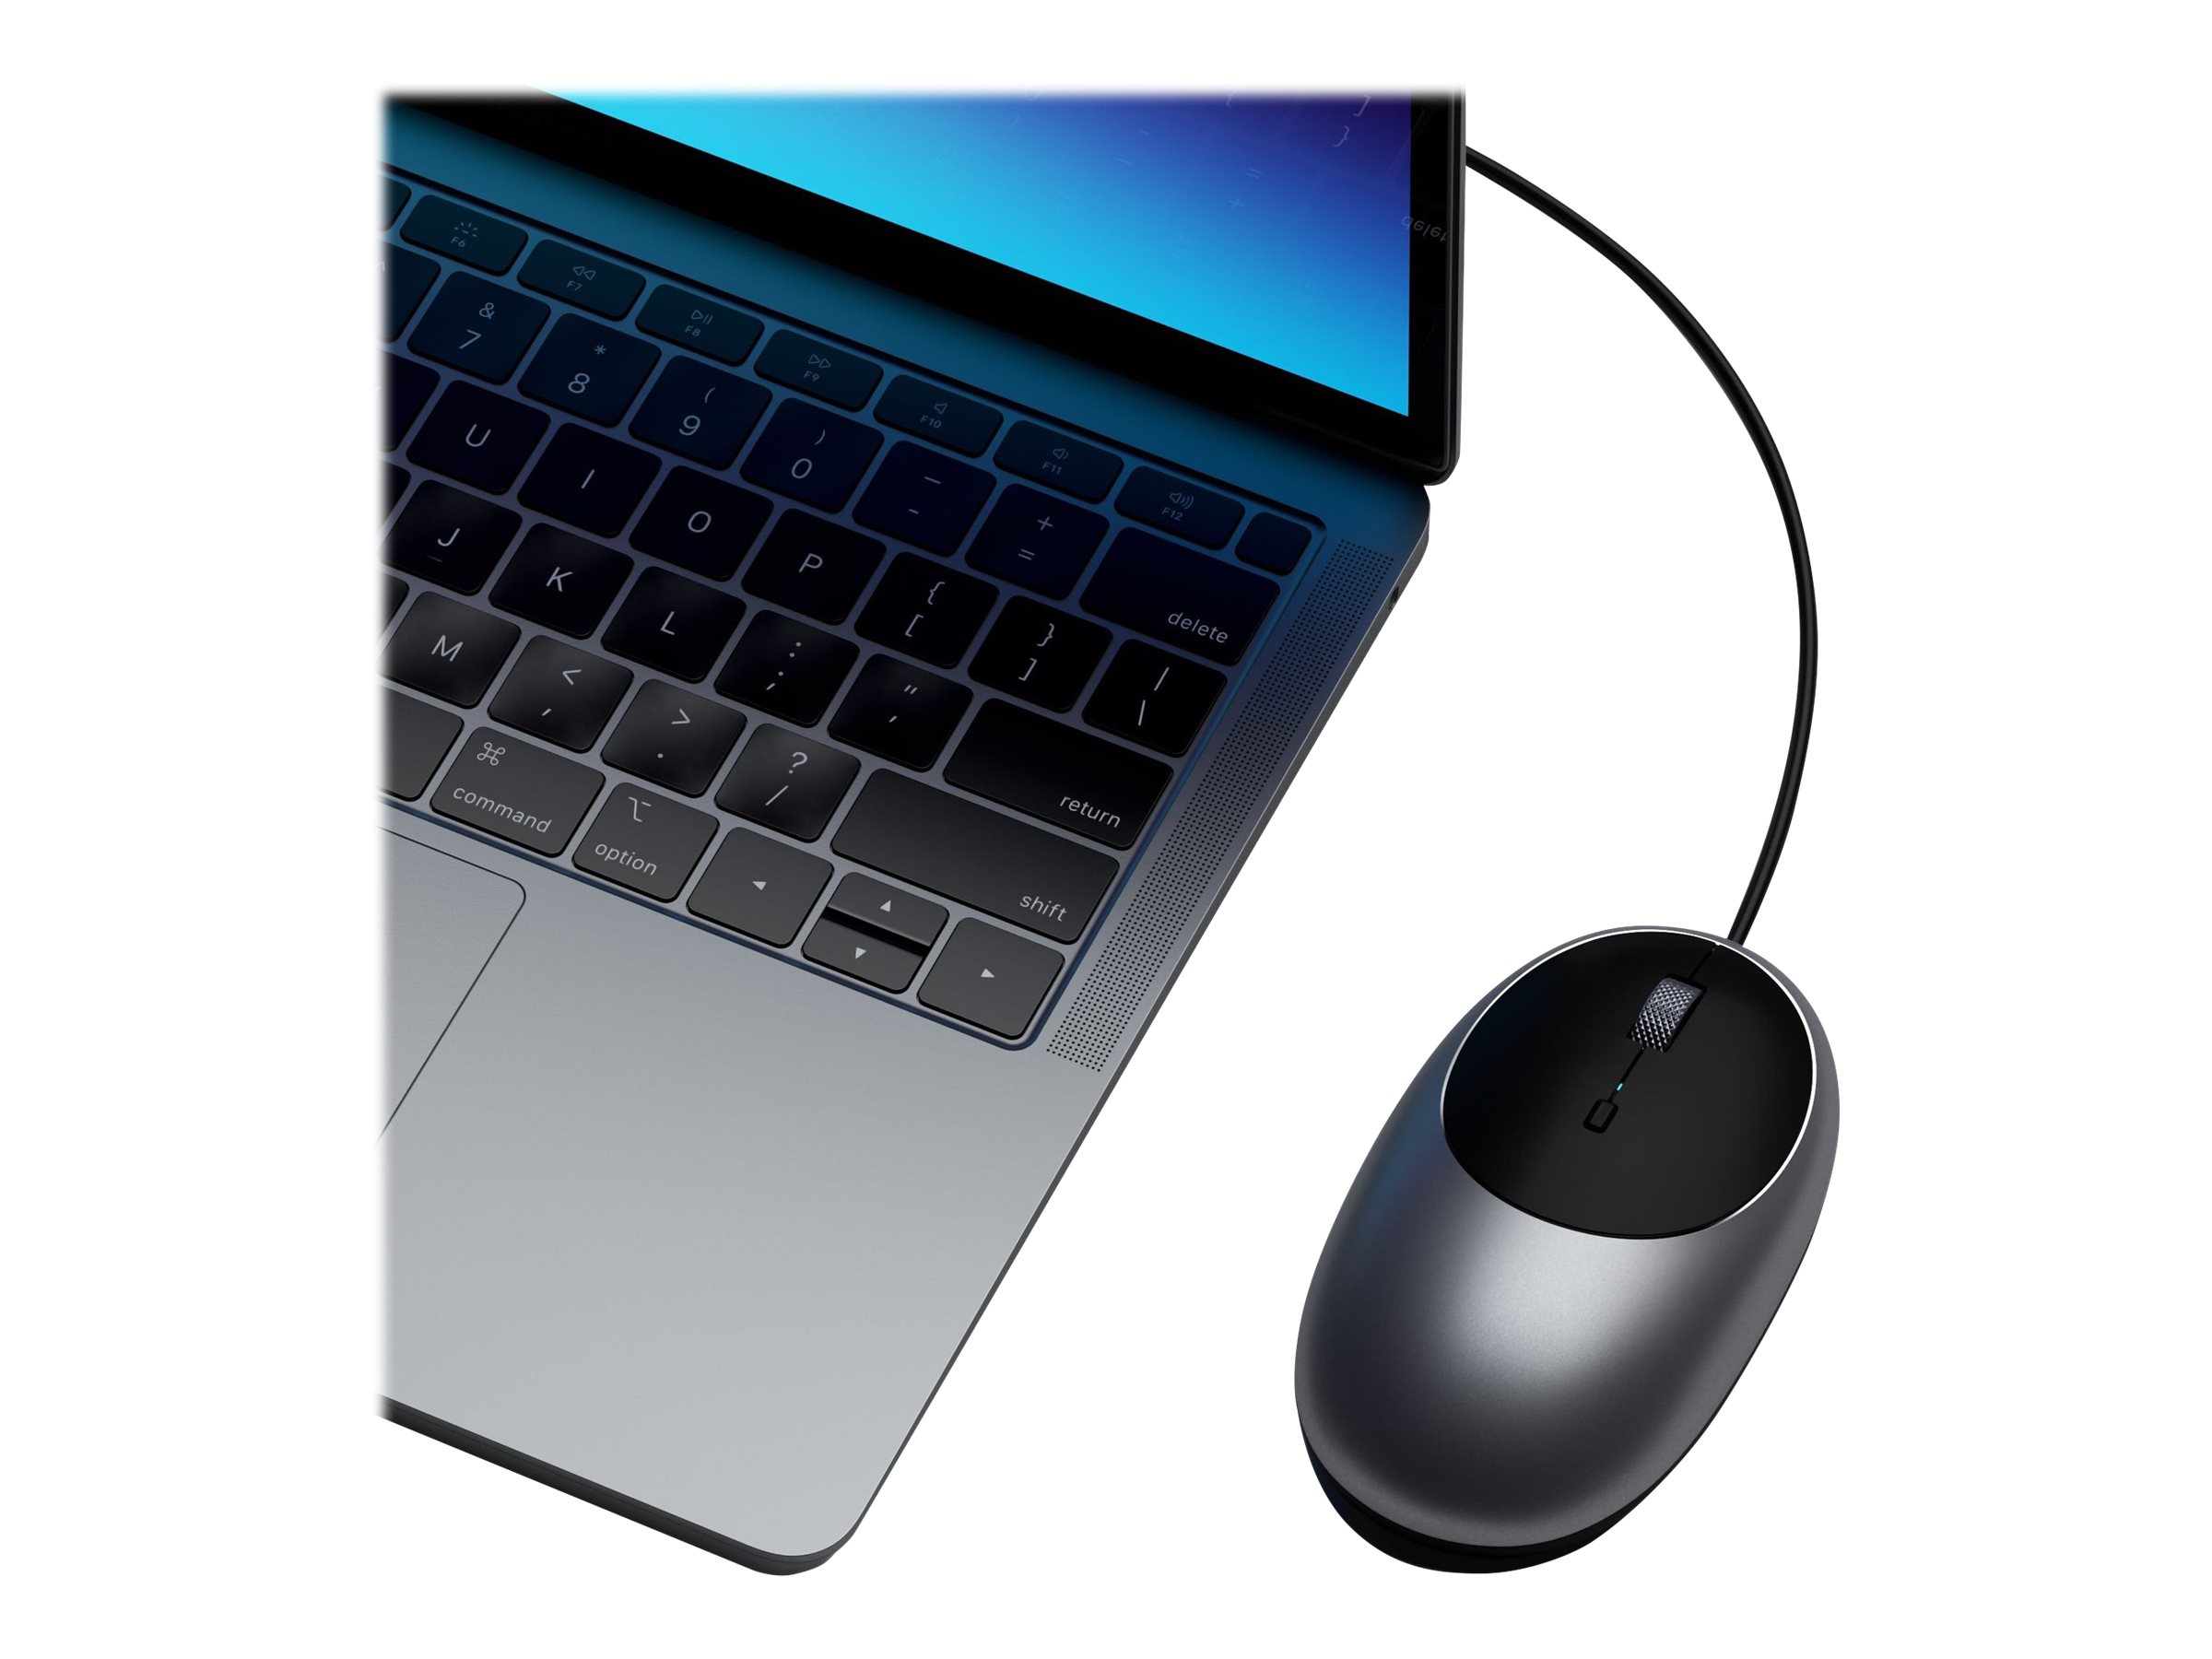 Satechi C1 USB-C Wired Mouse - Black - ST-AWUCMM